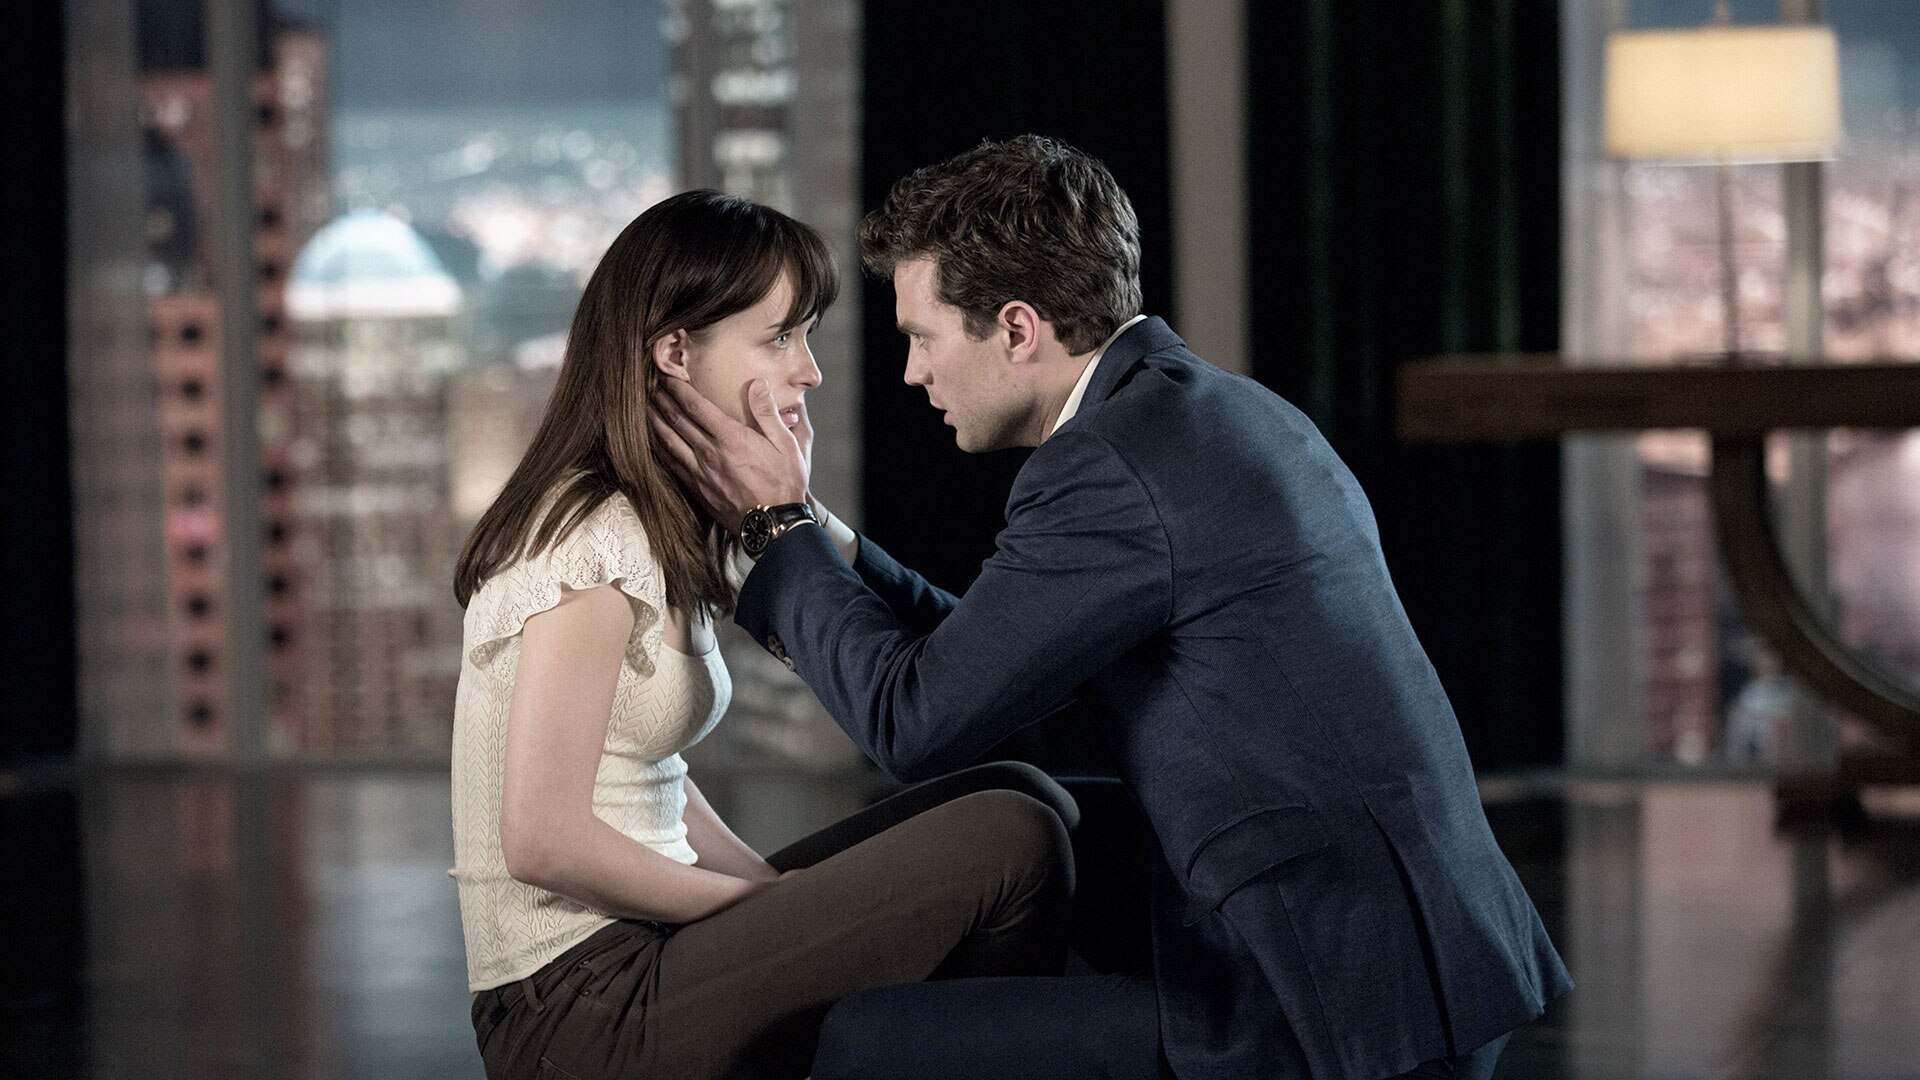 Watch Peacock trailer 'Fifty Shades of Grey (Trailer)' on NBC.com...